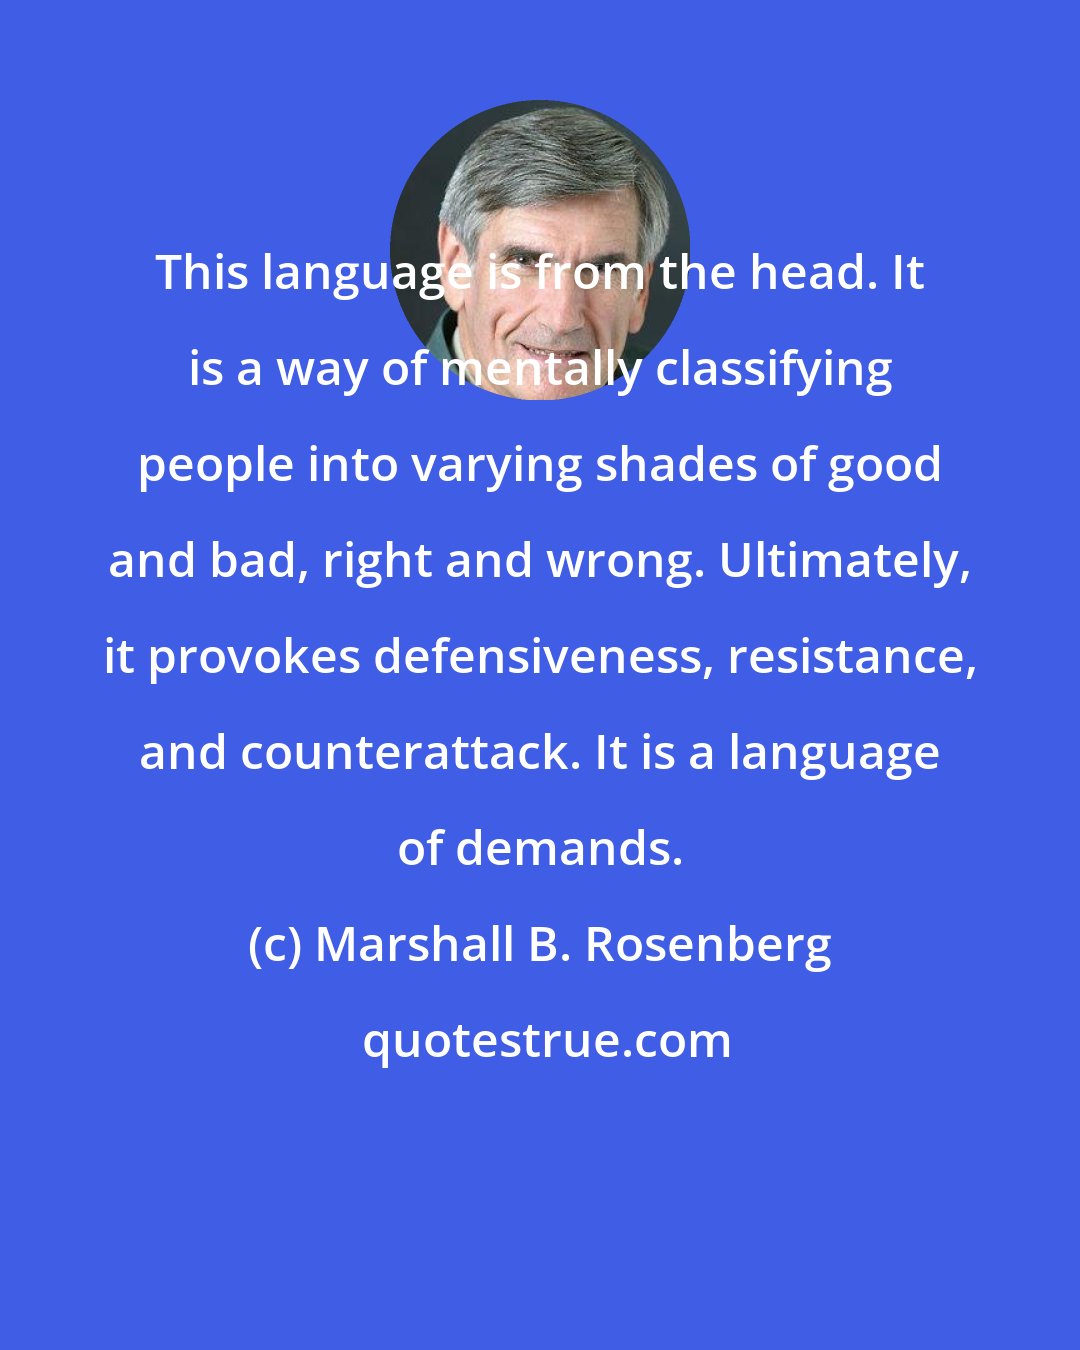 Marshall B. Rosenberg: This language is from the head. It is a way of mentally classifying people into varying shades of good and bad, right and wrong. Ultimately, it provokes defensiveness, resistance, and counterattack. It is a language of demands.